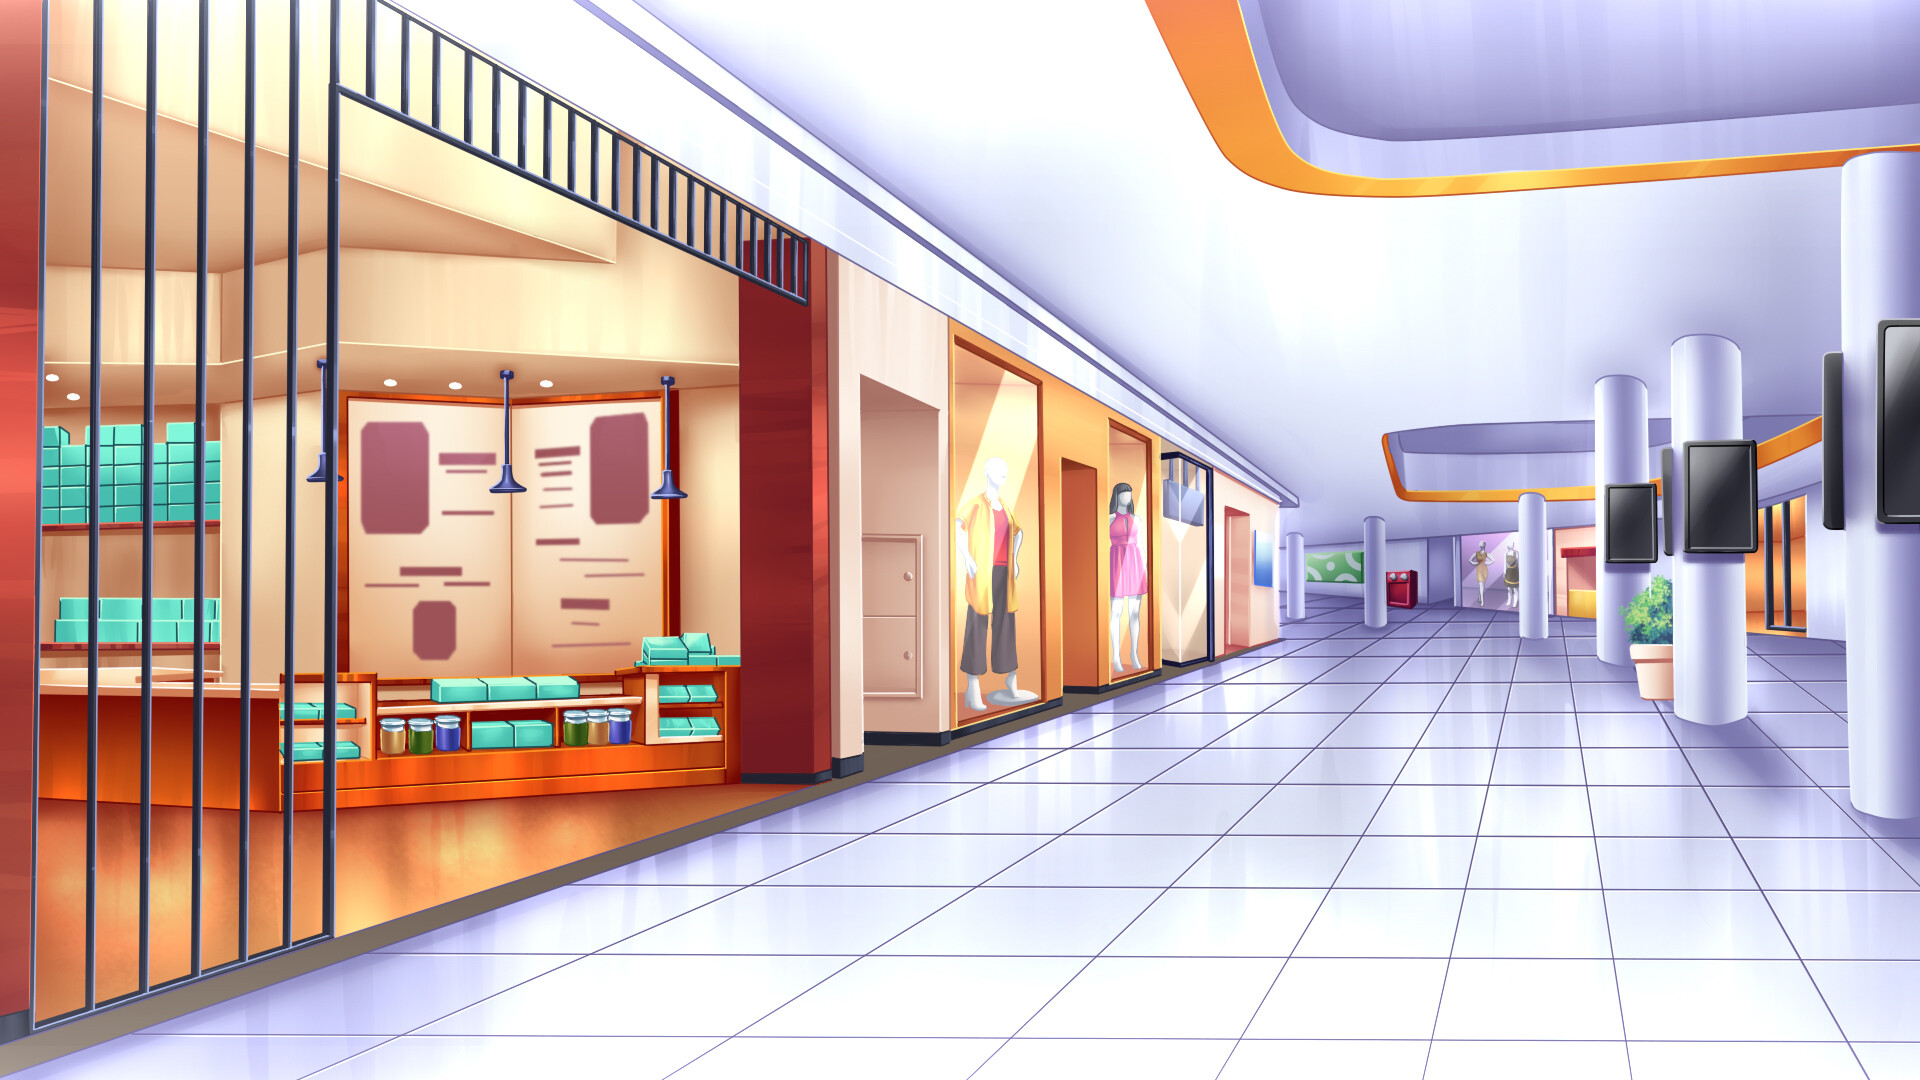 Anime style backgrounds for a shopping plaza  rNovelAi